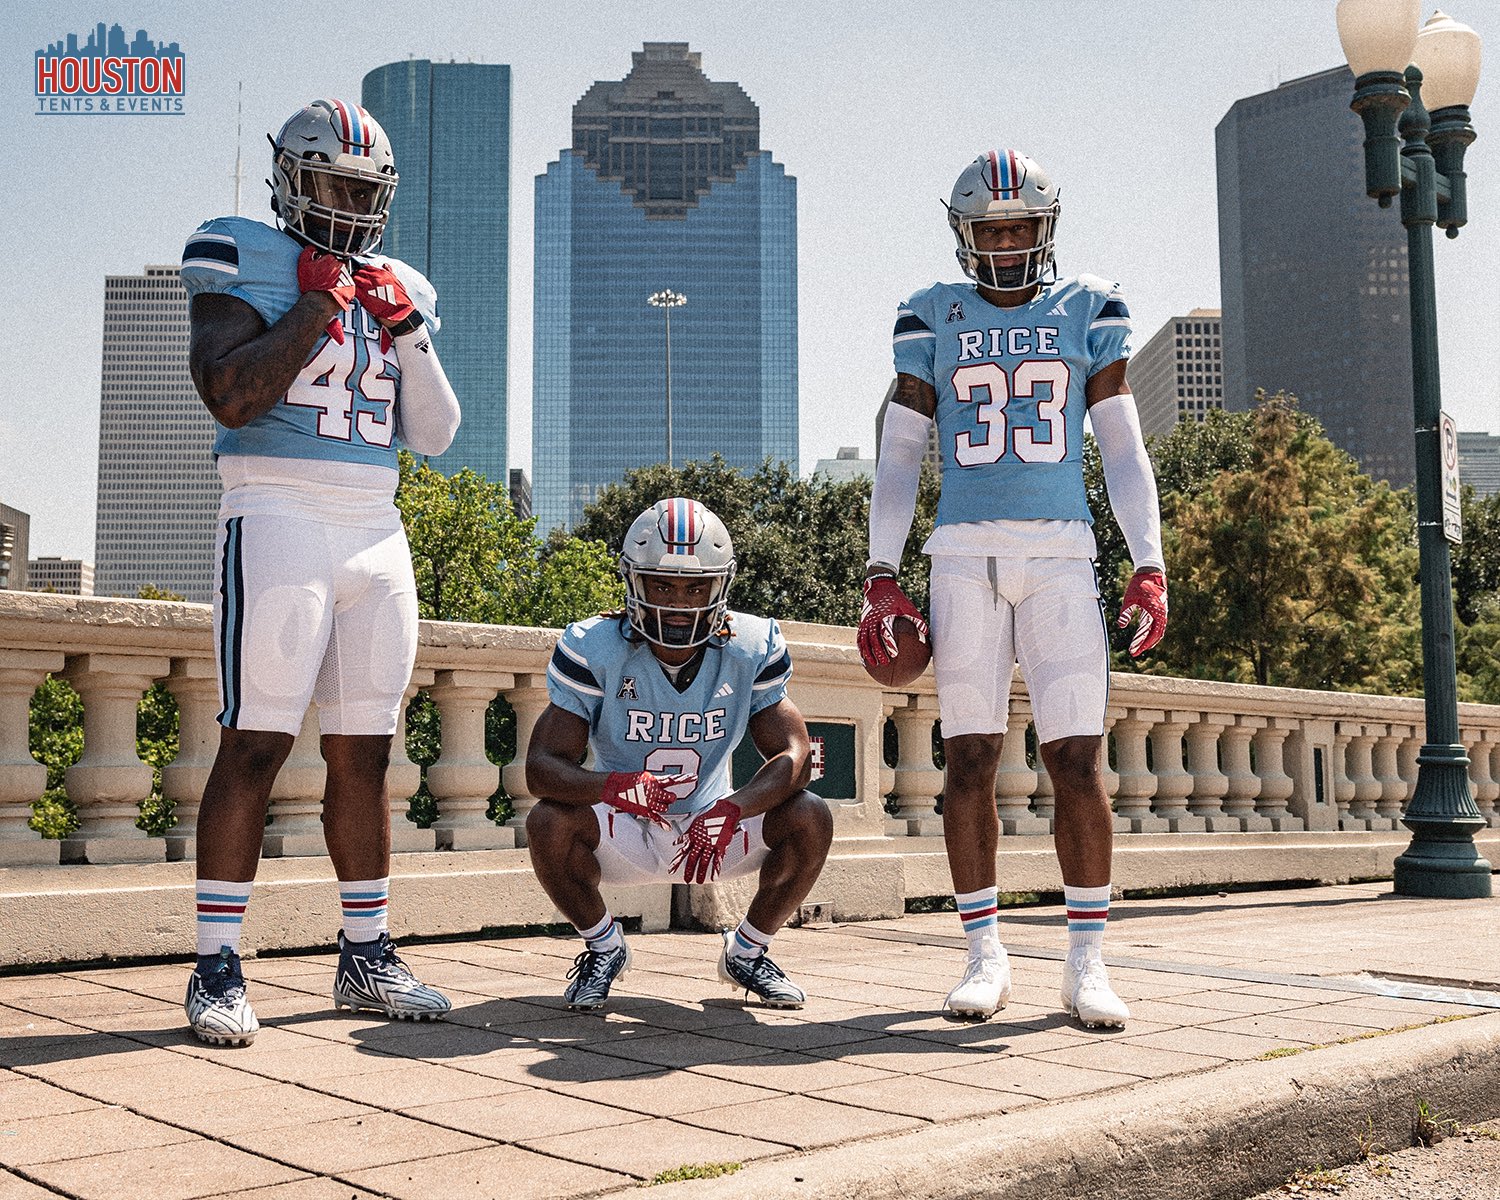 Legacy lost: Should Titans return 'Oilers' to Houston, site of